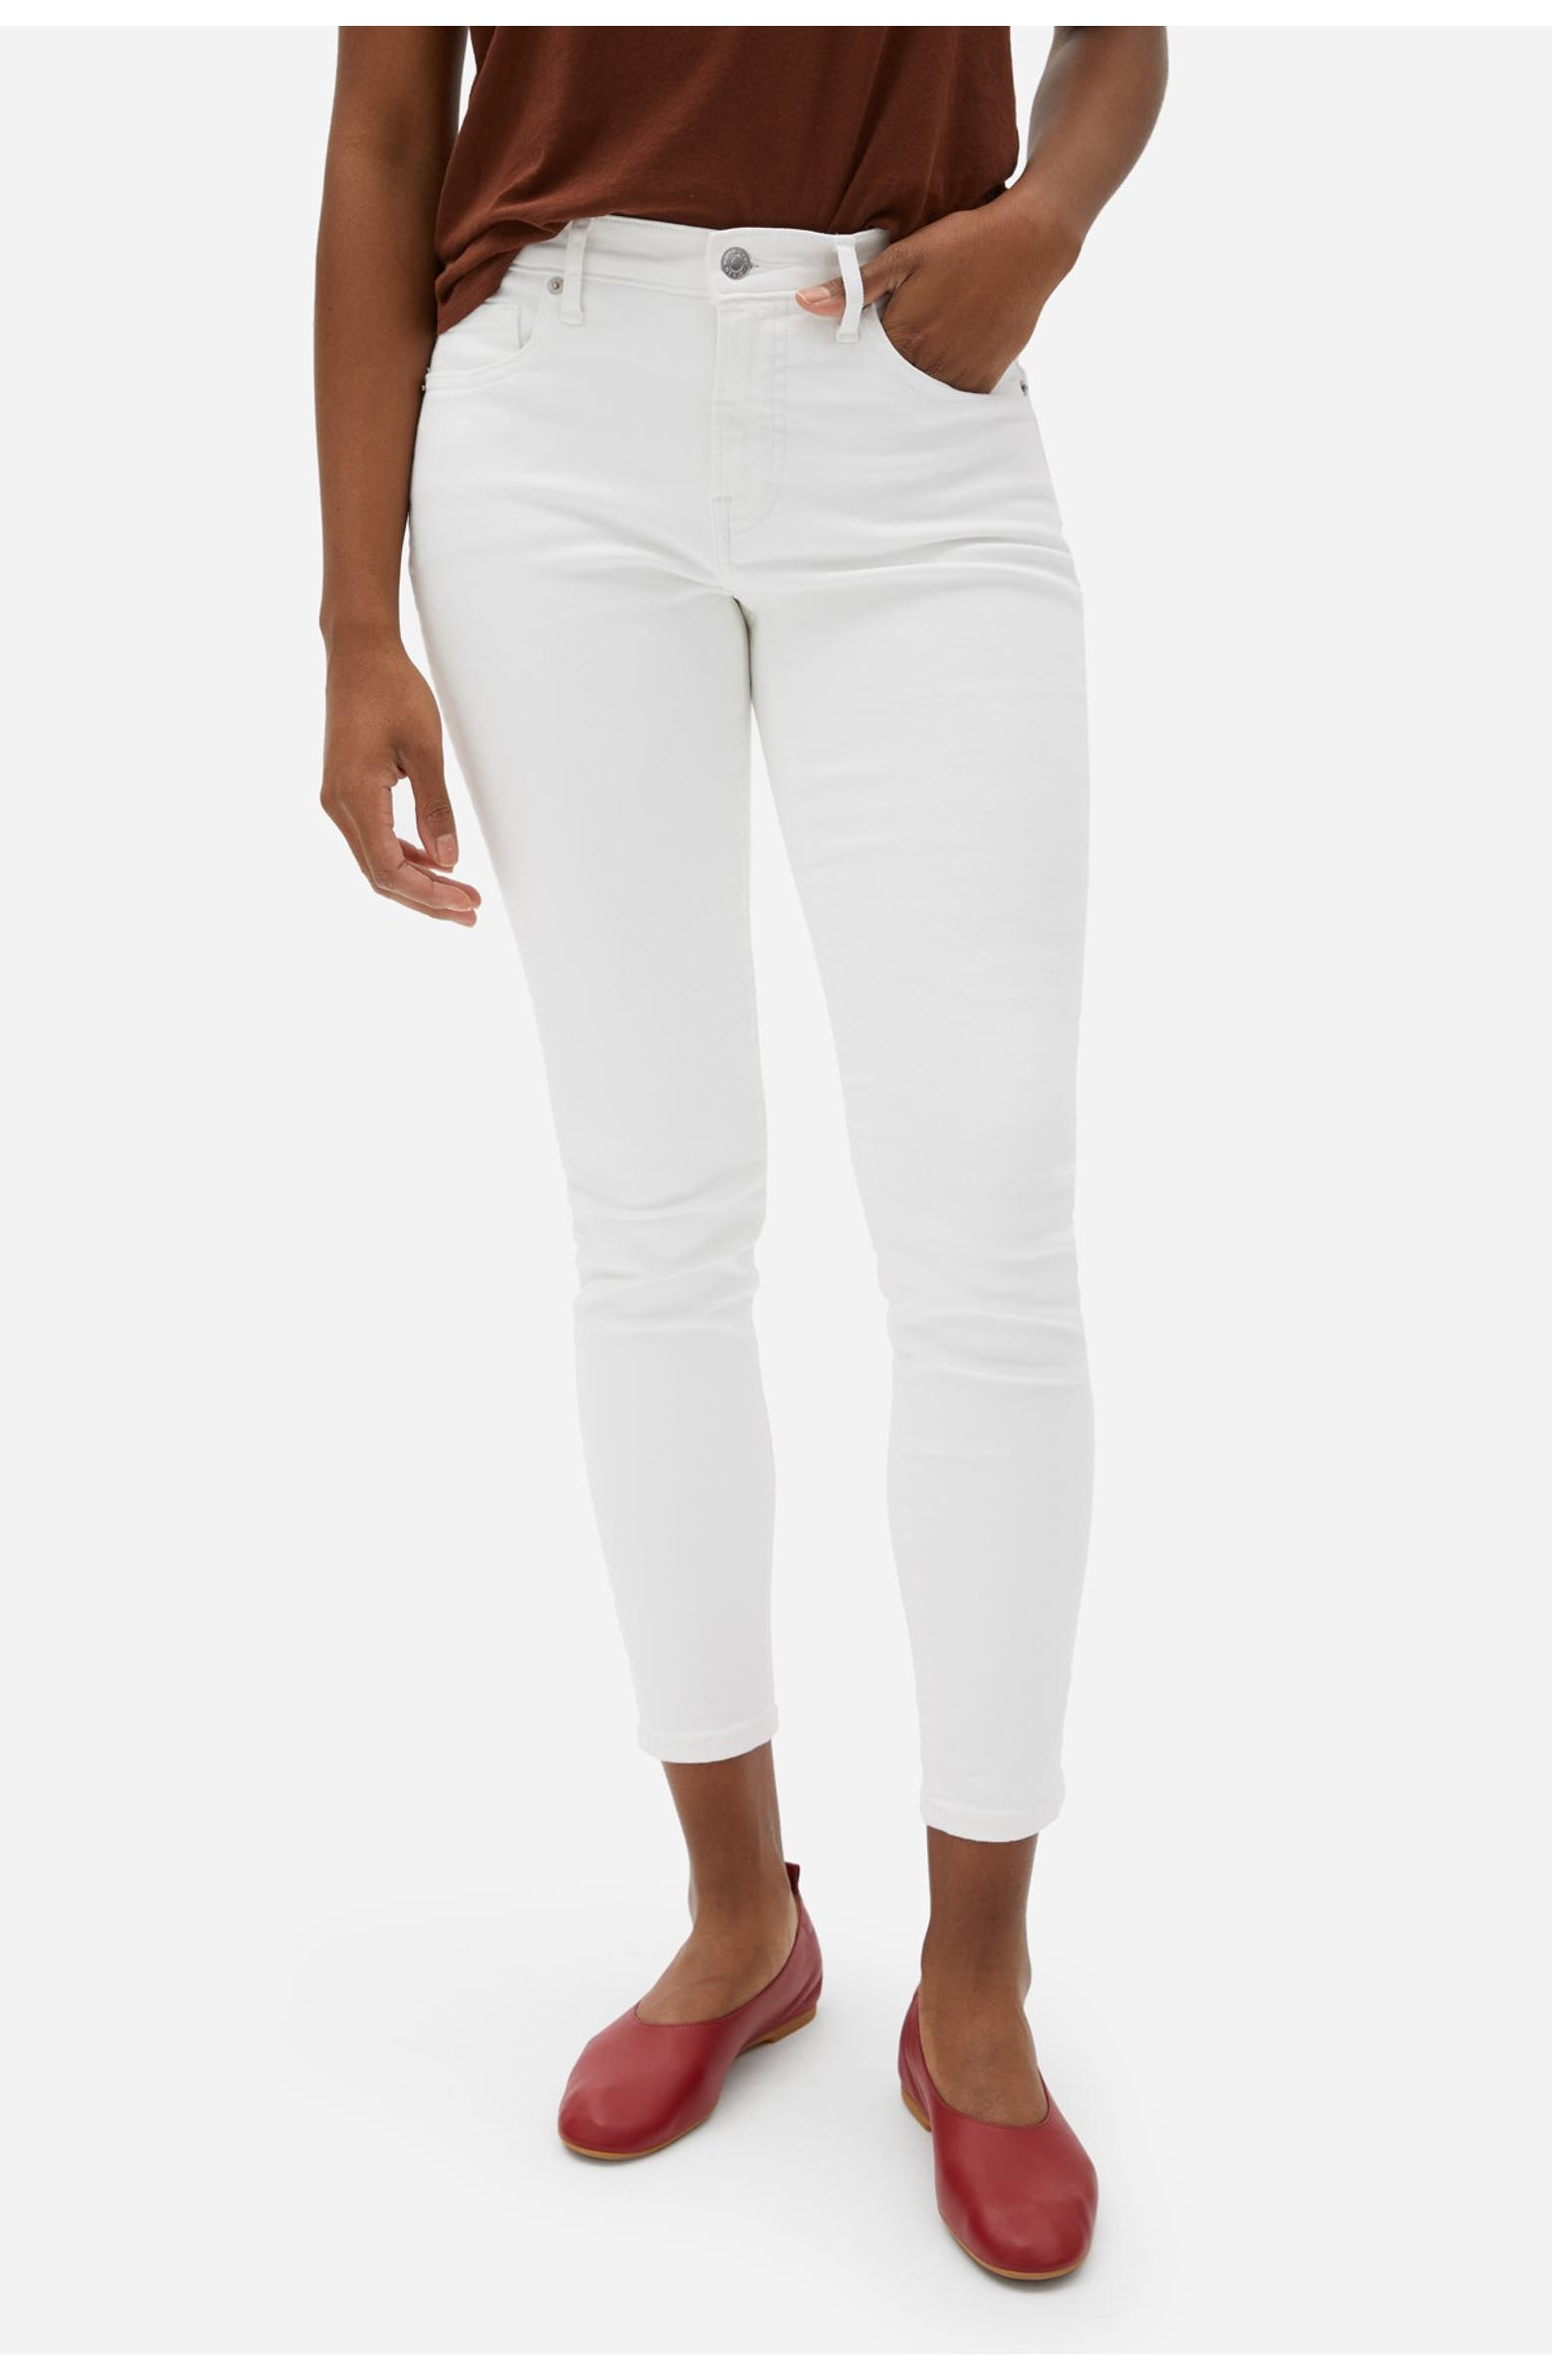 Everlane The Authentic Stretch Mid Rise Skinny Jean